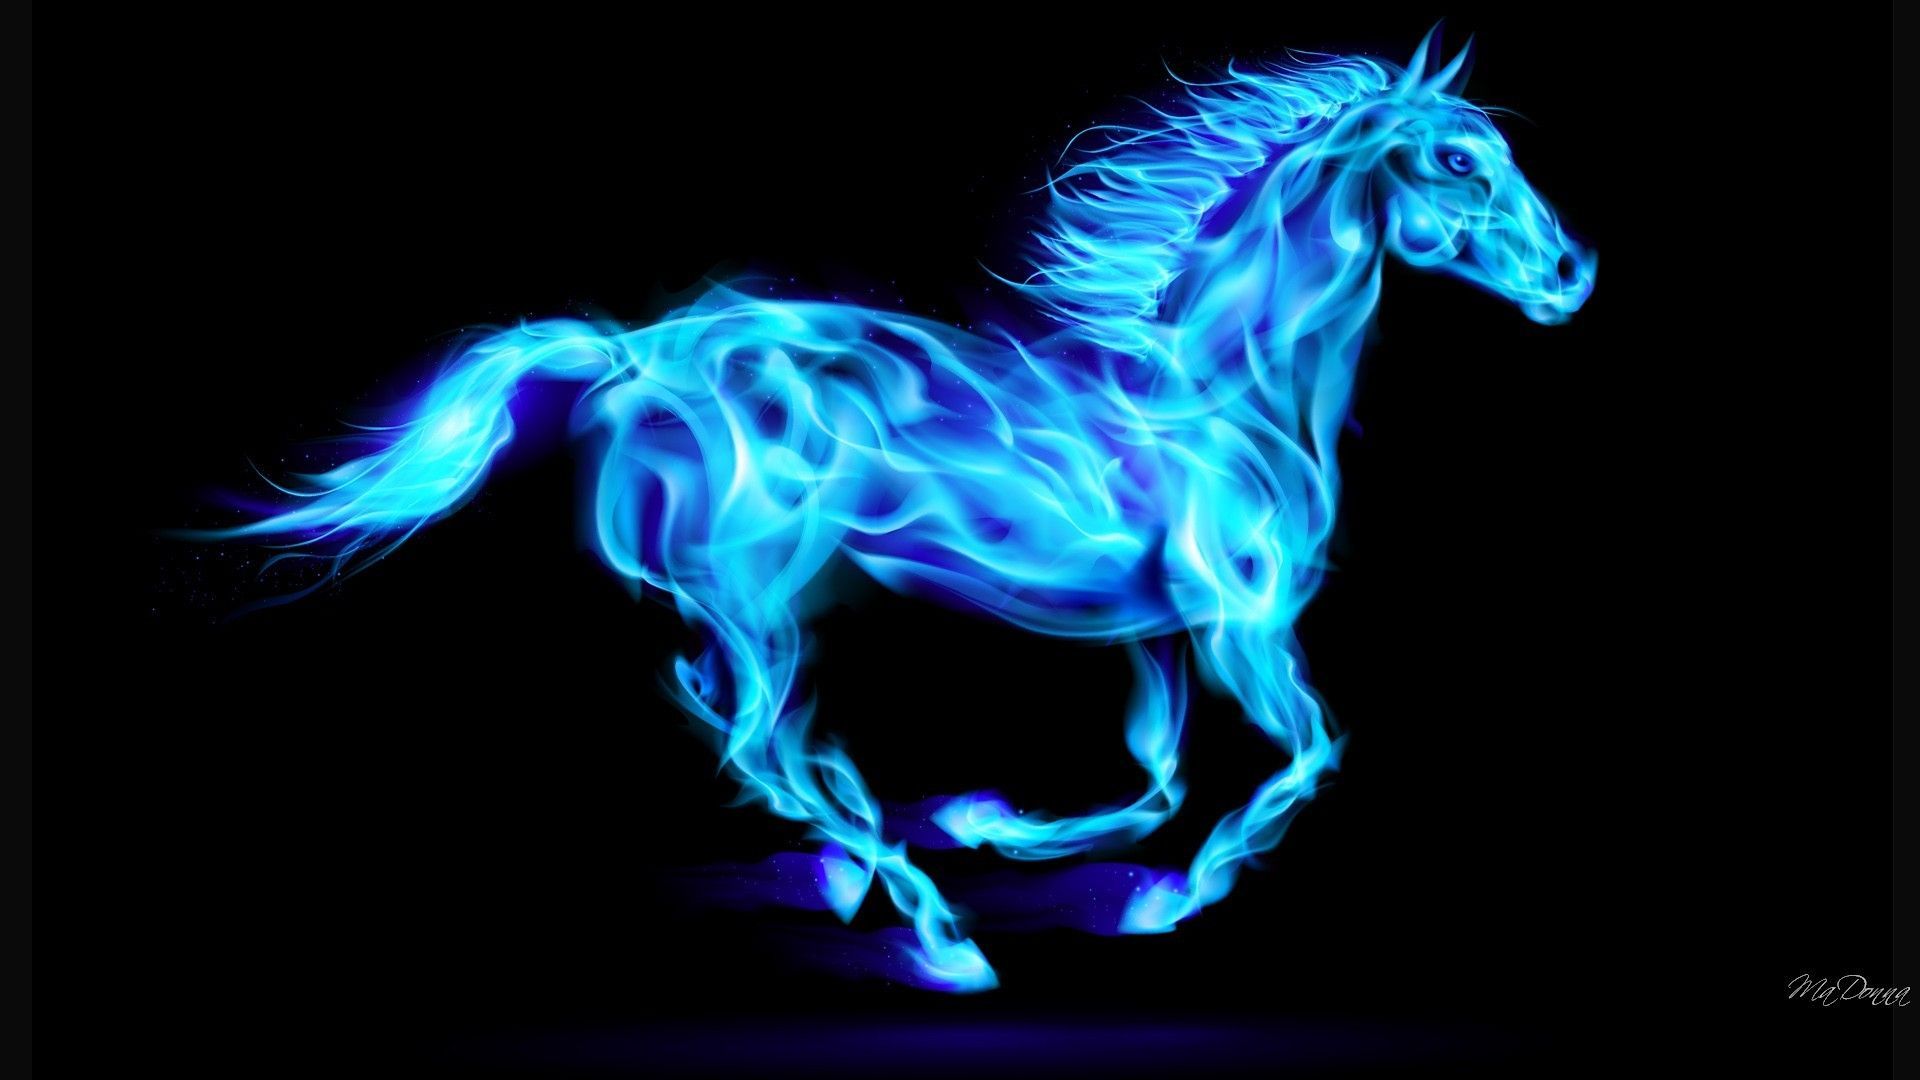 7 White Horse - 7 horse Wallpaper Download | MobCup